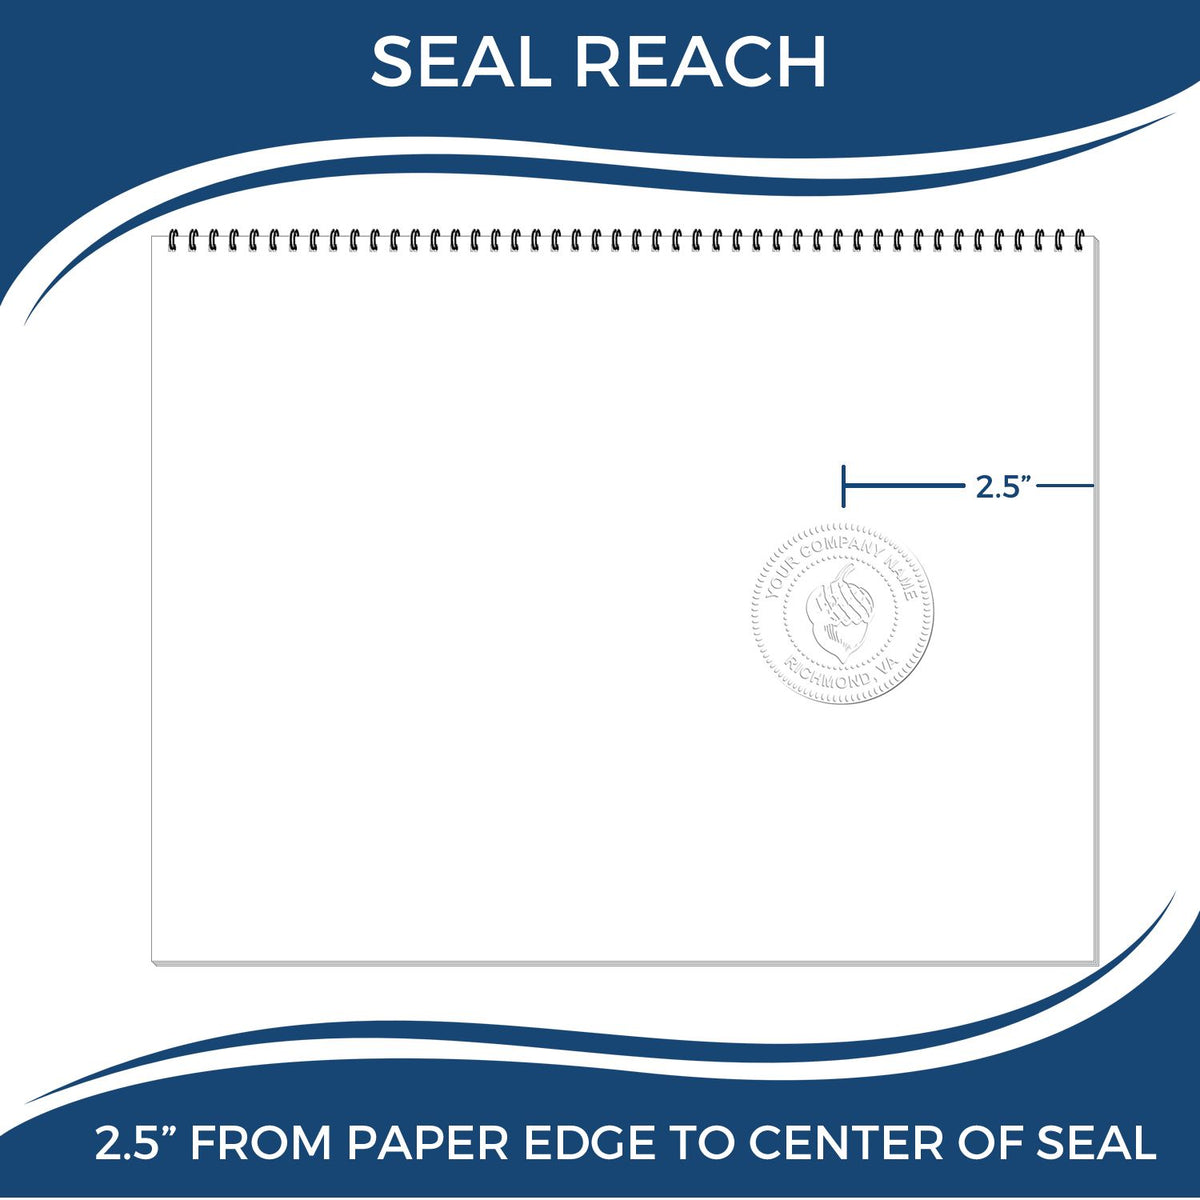 An infographic showing the seal reach which is represented by a ruler and a miniature seal image of the Heavy Duty Cast Iron South Dakota Geologist Seal Embosser